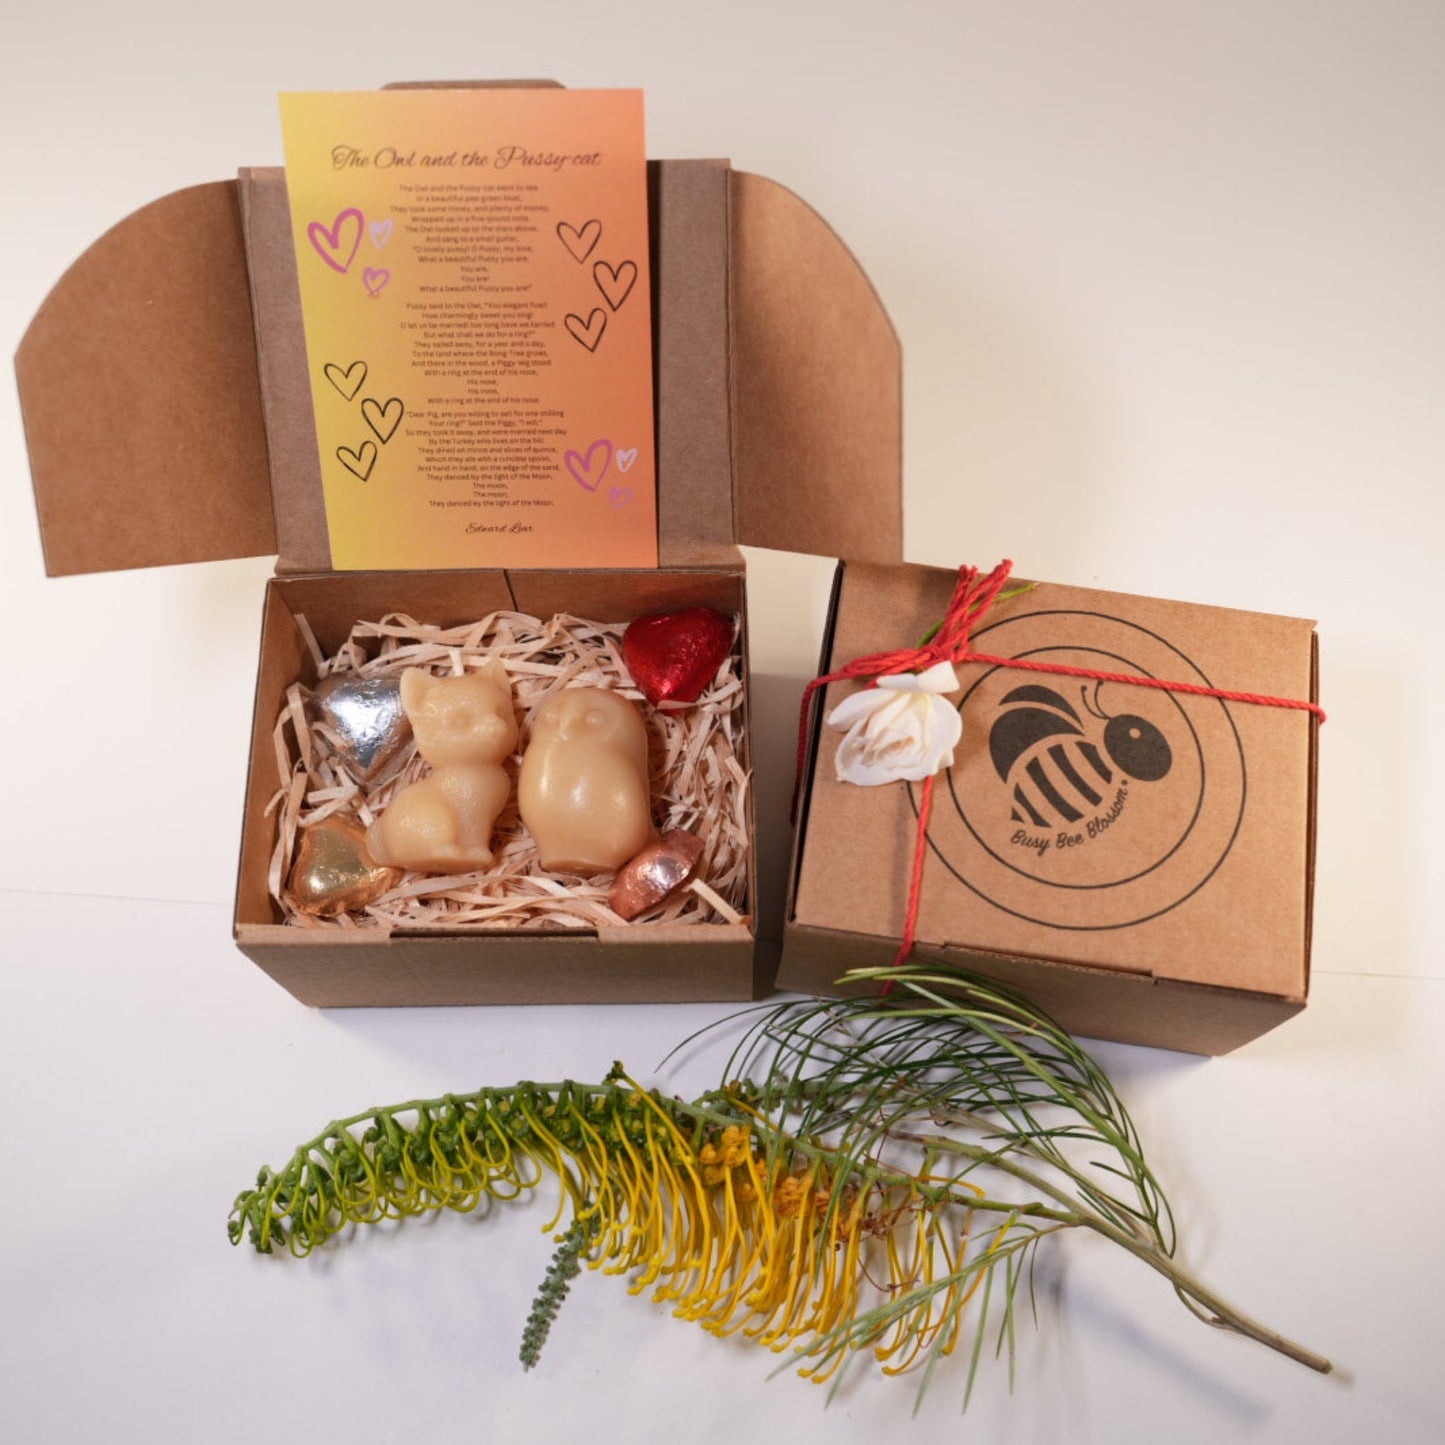 Owl and the Pussy-cat Gift box set has two beeswax candles, poem and chocolates - perfect for Mother's Day